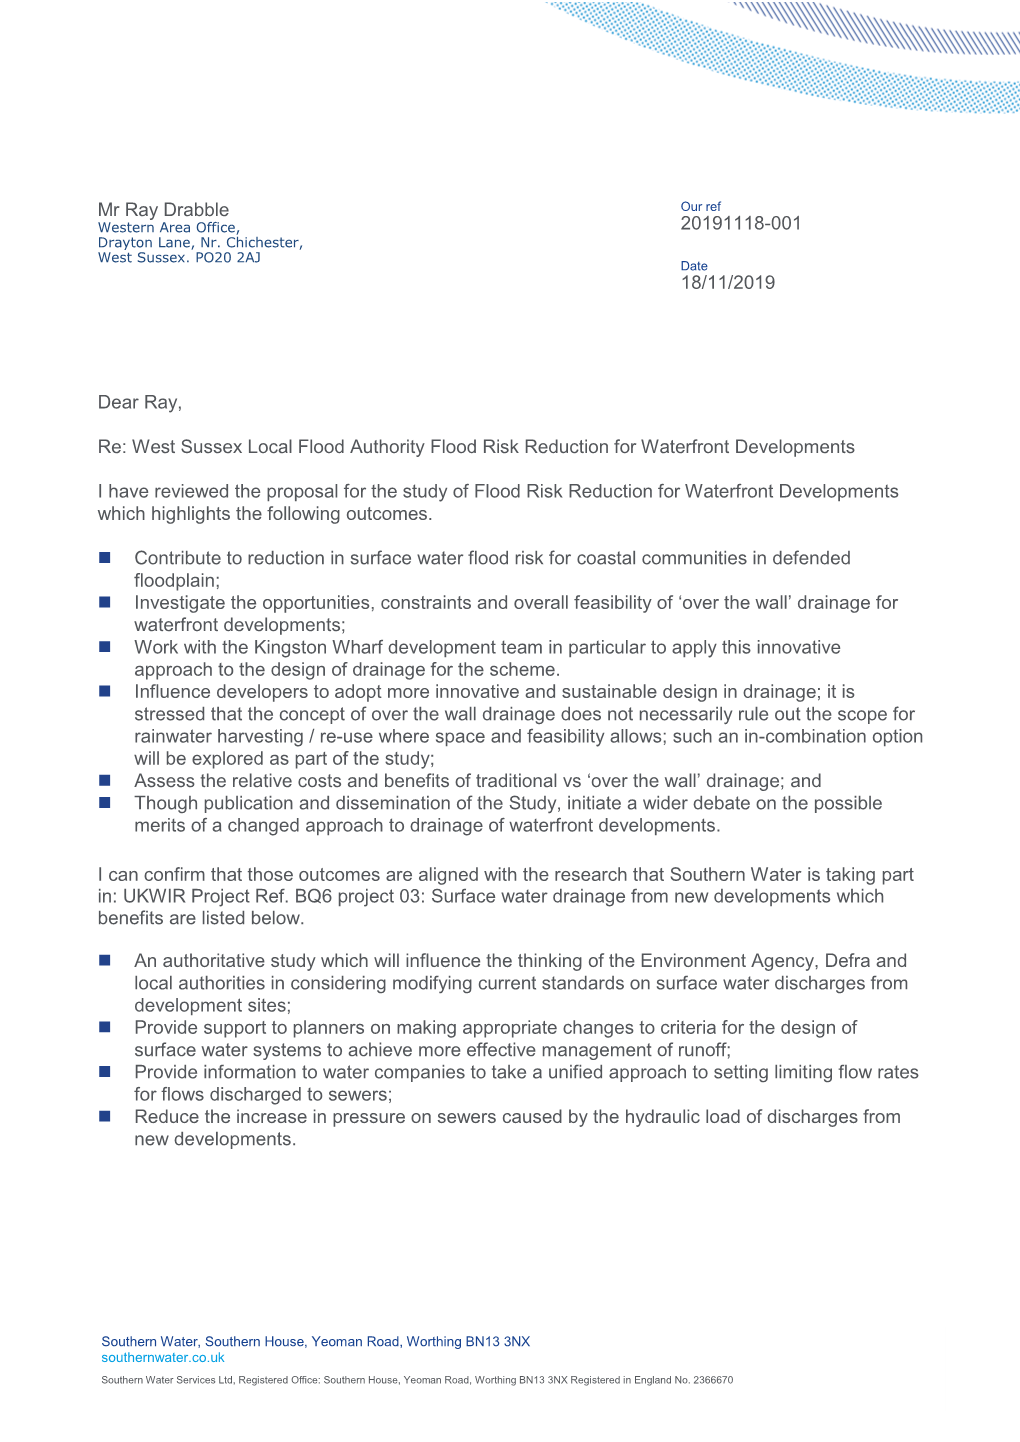 Southern Water Letter of Support for the Project